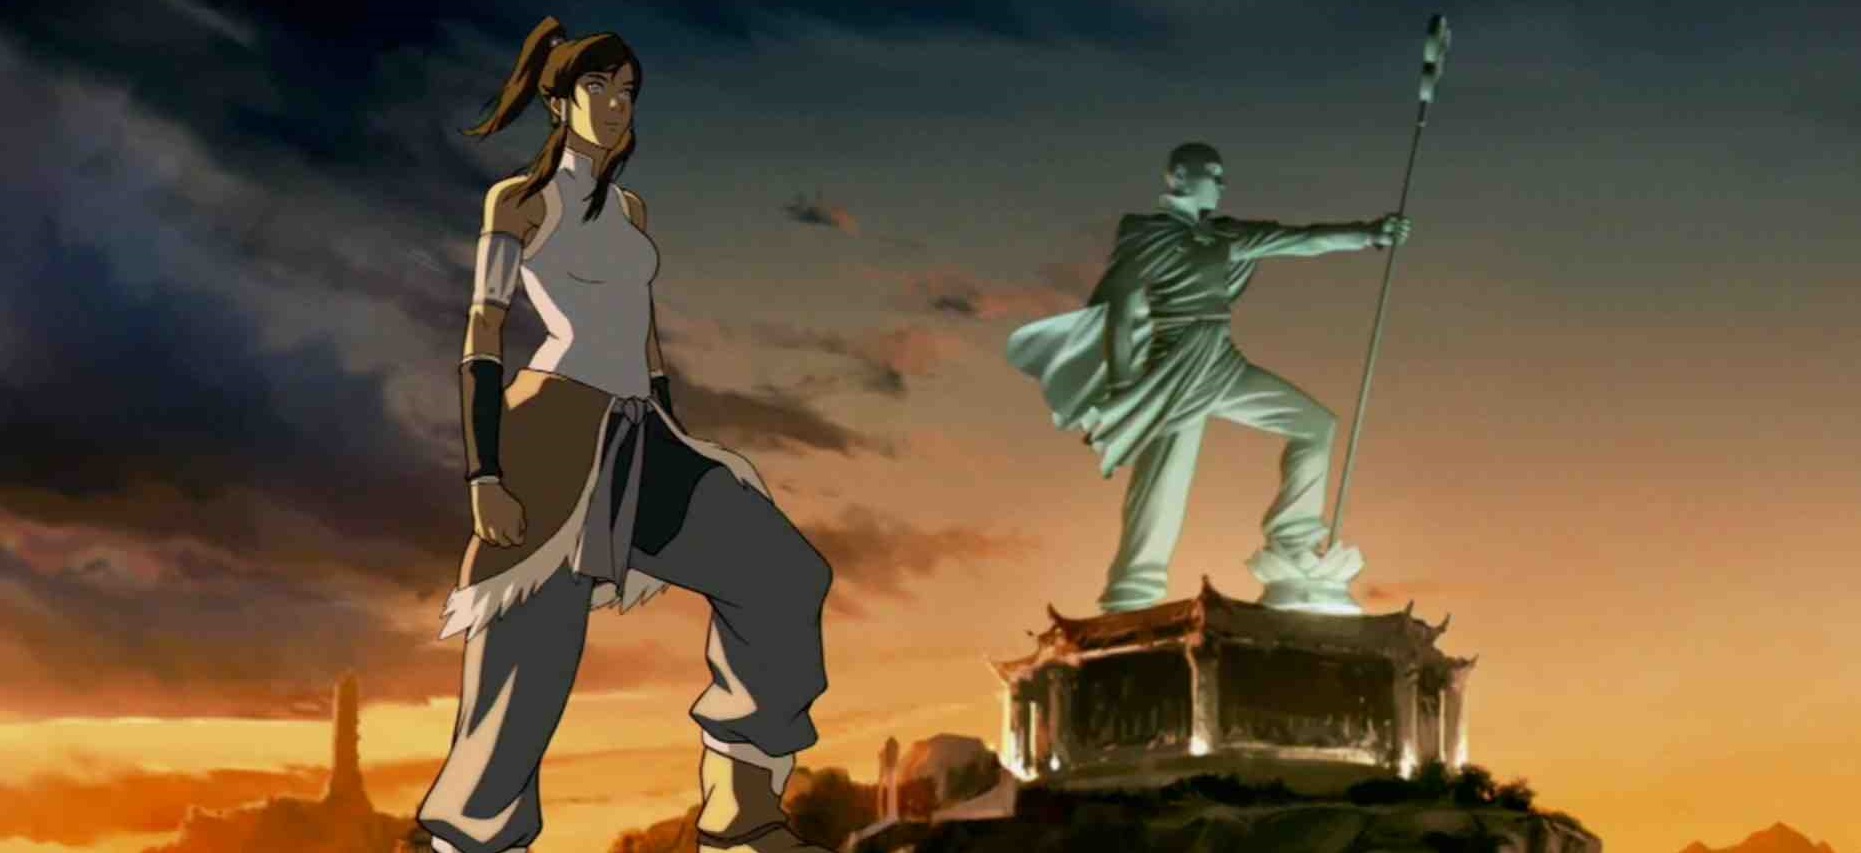 “Legend of Korra” Game Release Date Announced As “Book 3” of the Show Concludes - Developers Also Go into Detail on the Pro-Bending Mode